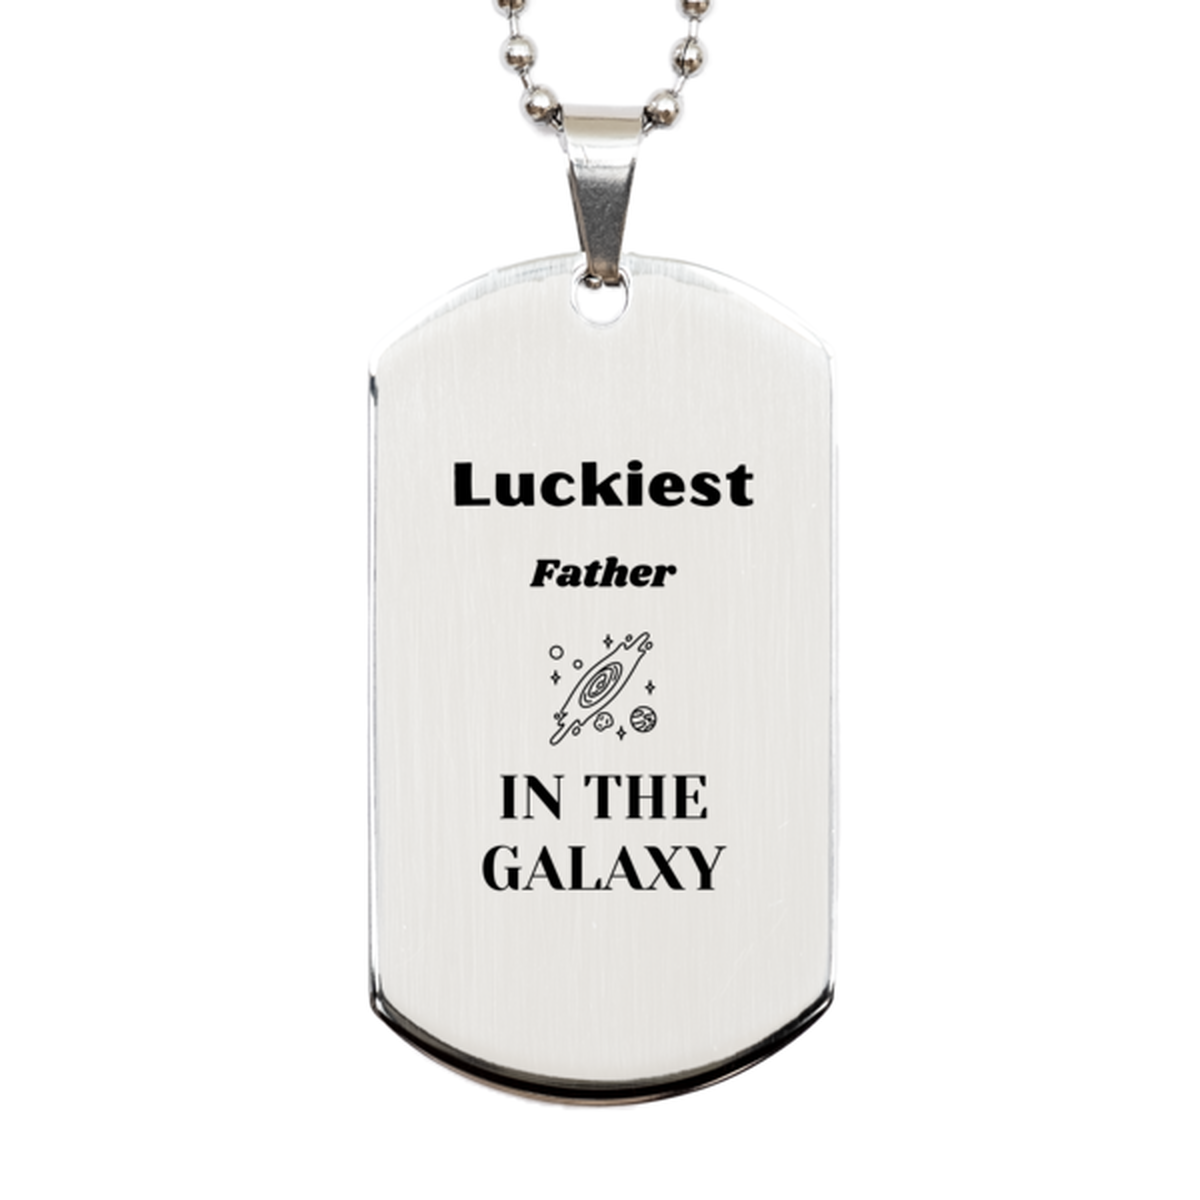 Luckiest Father in the Galaxy, To My Father Engraved Gifts, Christmas Father Silver Dog Tag Gifts, X-mas Birthday Unique Gifts For Father Men Women